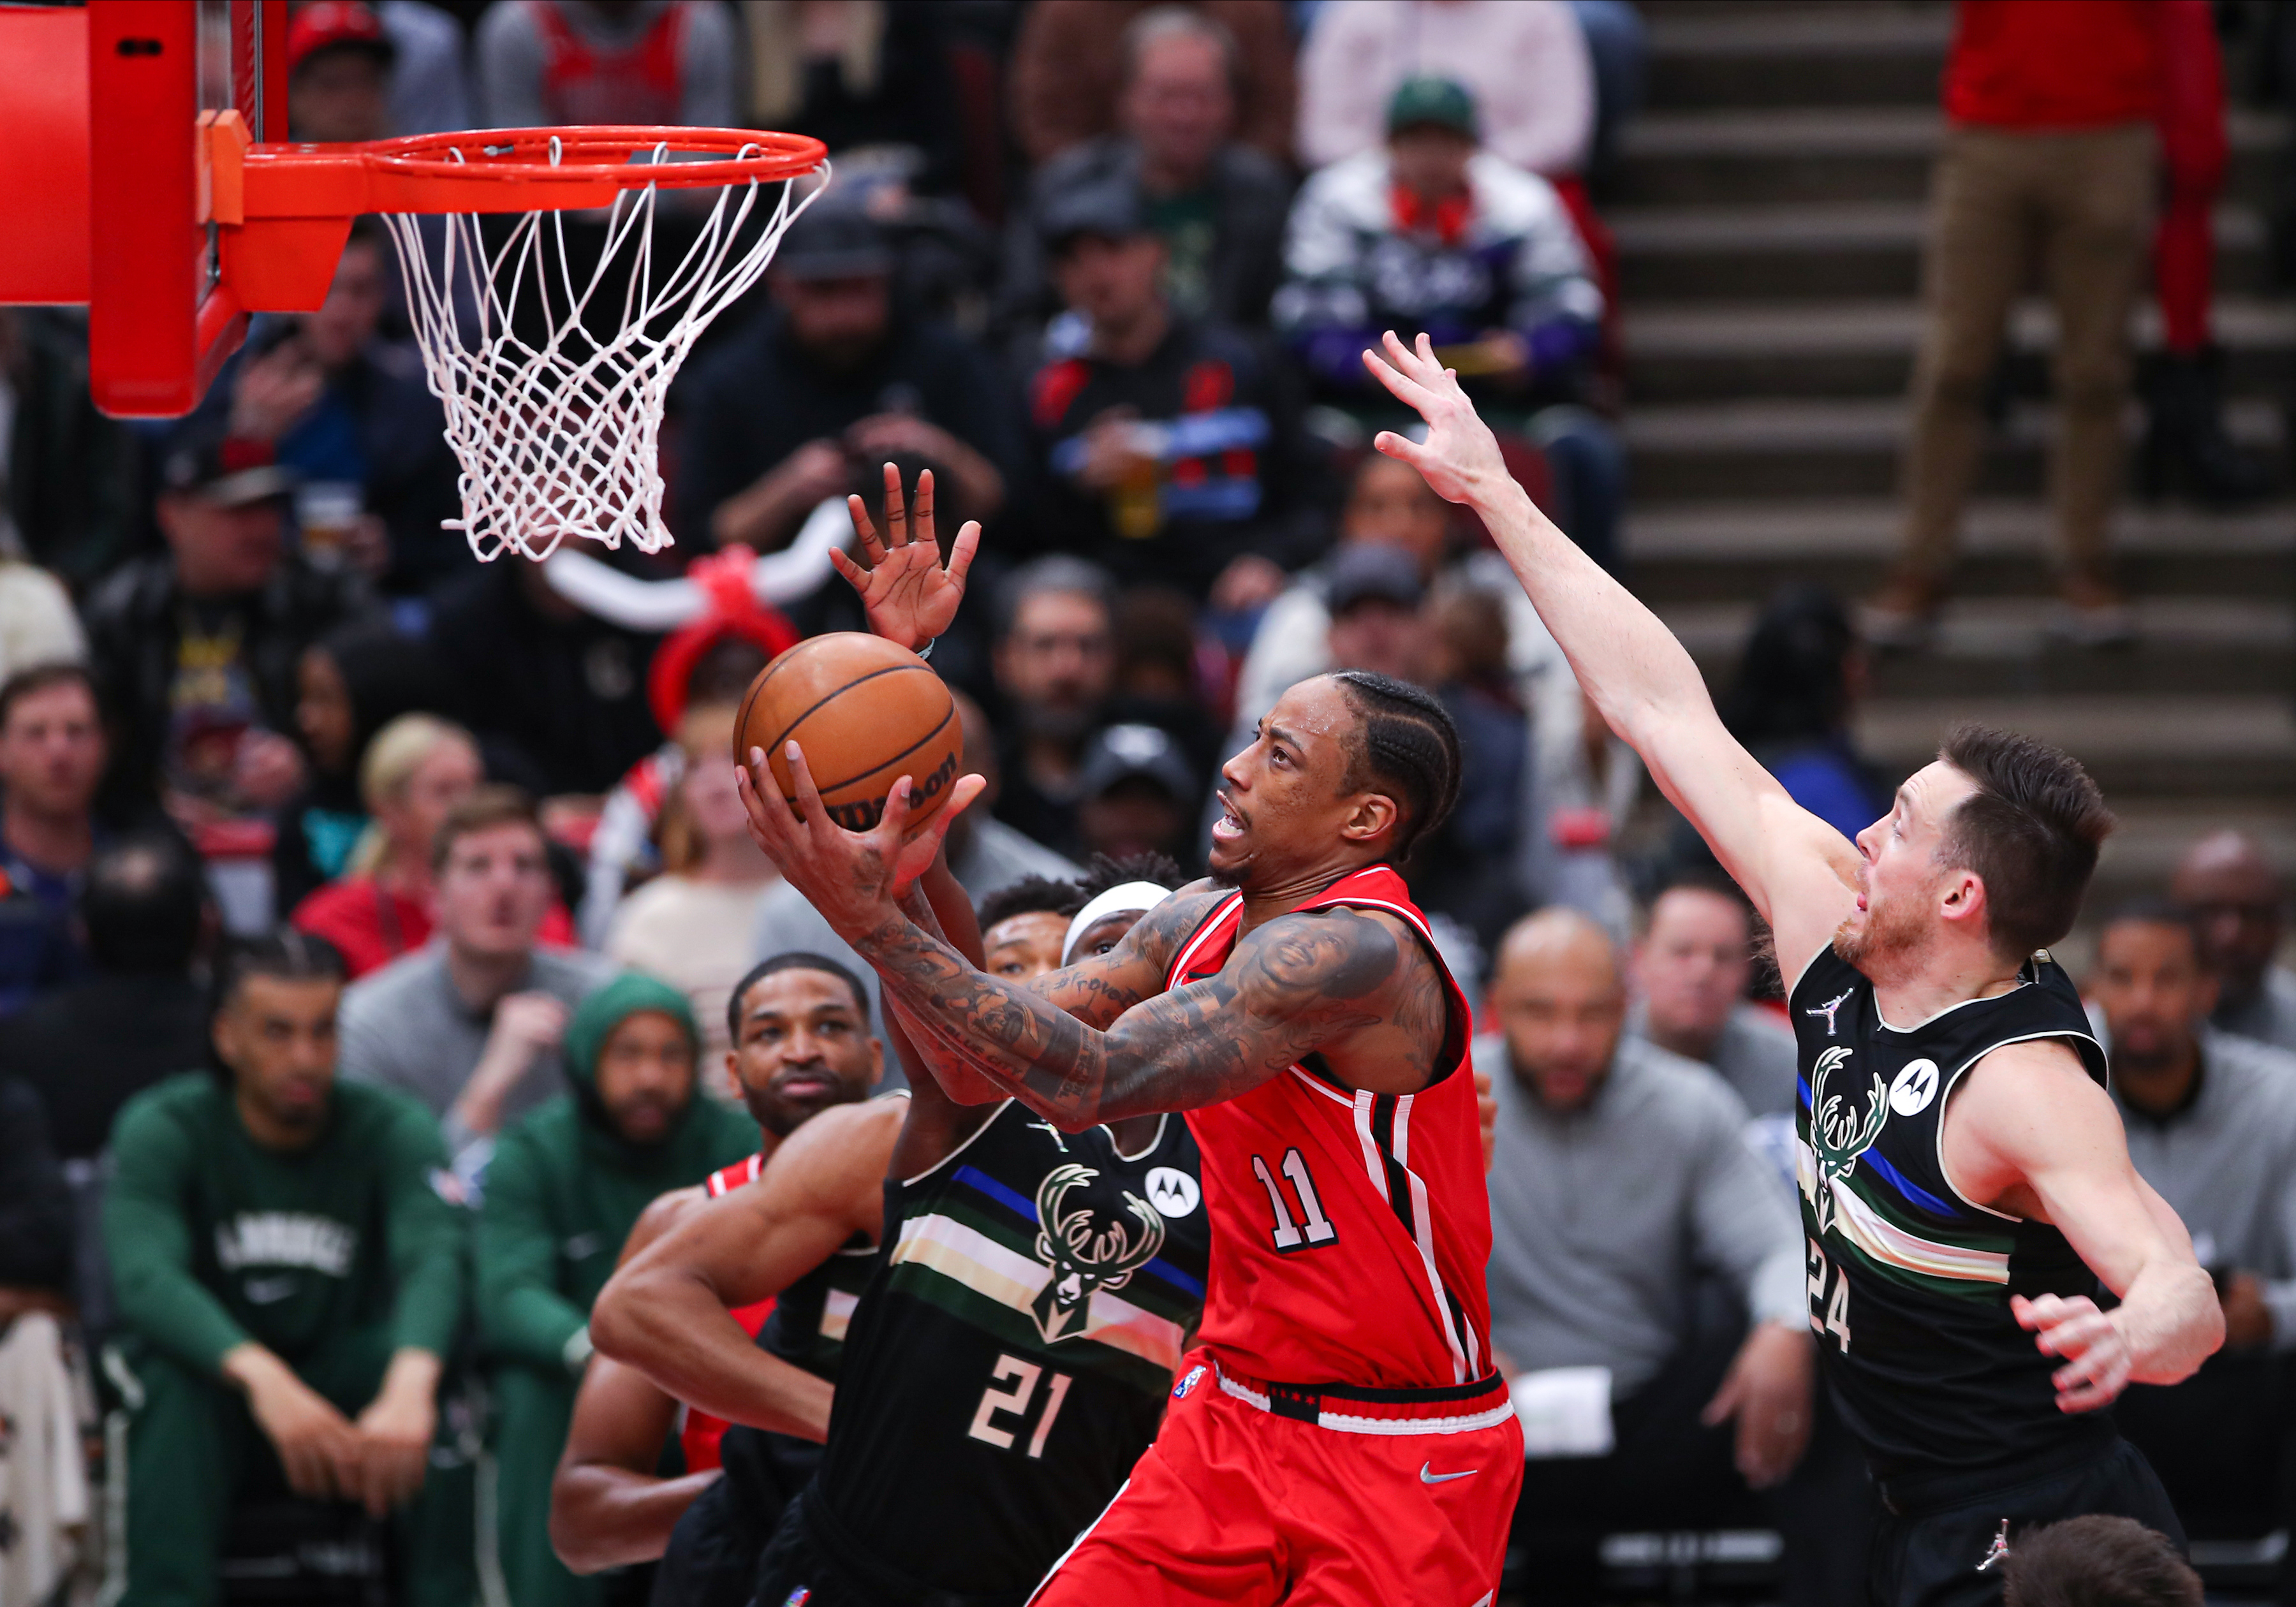 Chicago Bulls wing DeMar DeRozan shoots a layup during an NBA game against the Milwaukee Bucks during a game in April 2022